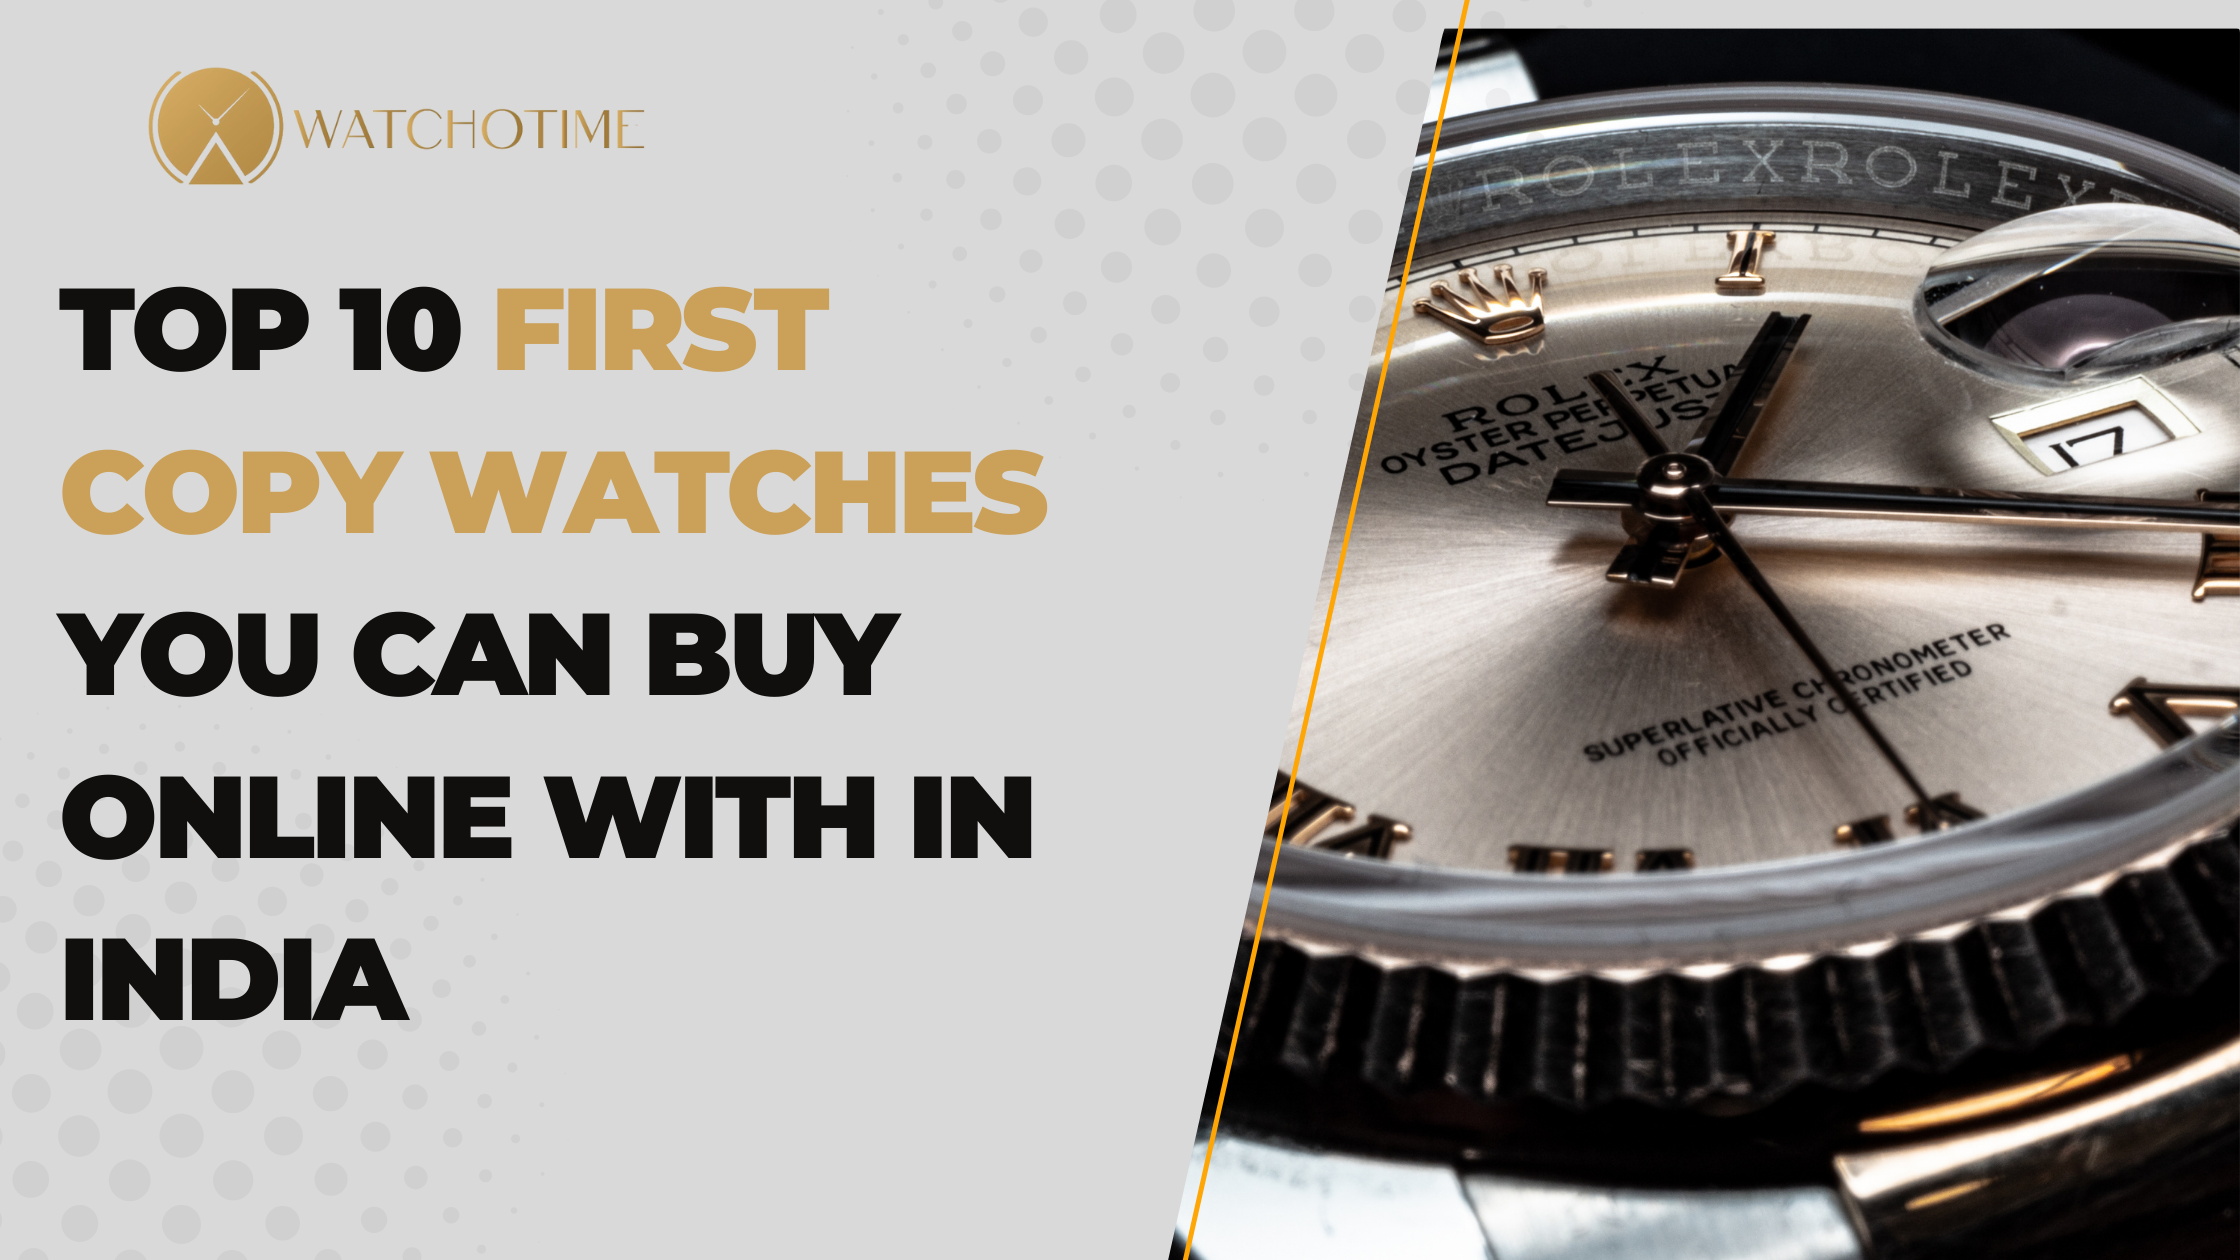 Top 10 First Copy Watches You Can Buy Online with in India